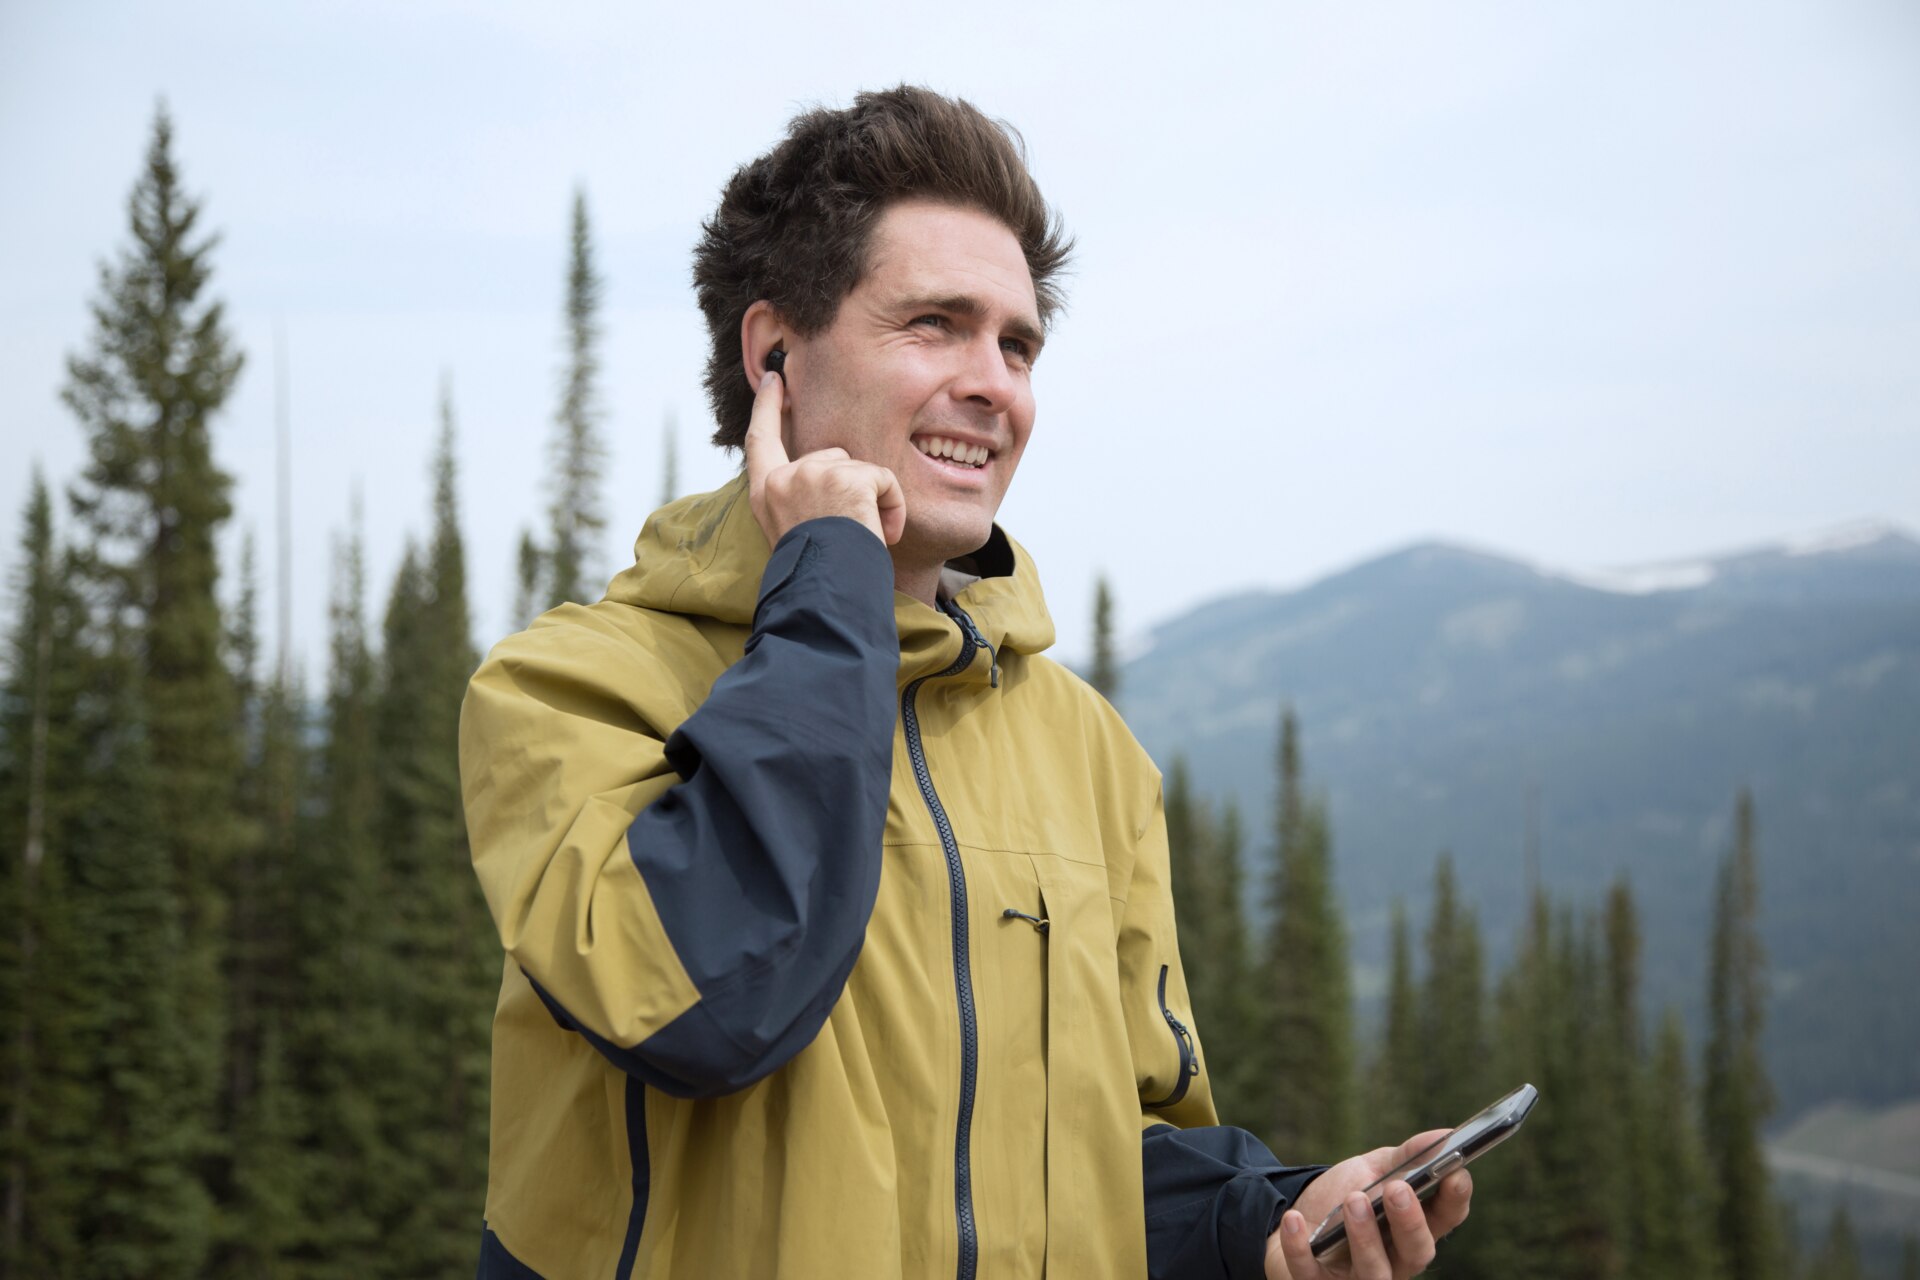 Man wearing Virto Marvel hearing aid holding a smartphone in his hand has a conversation - a mountain scenery.